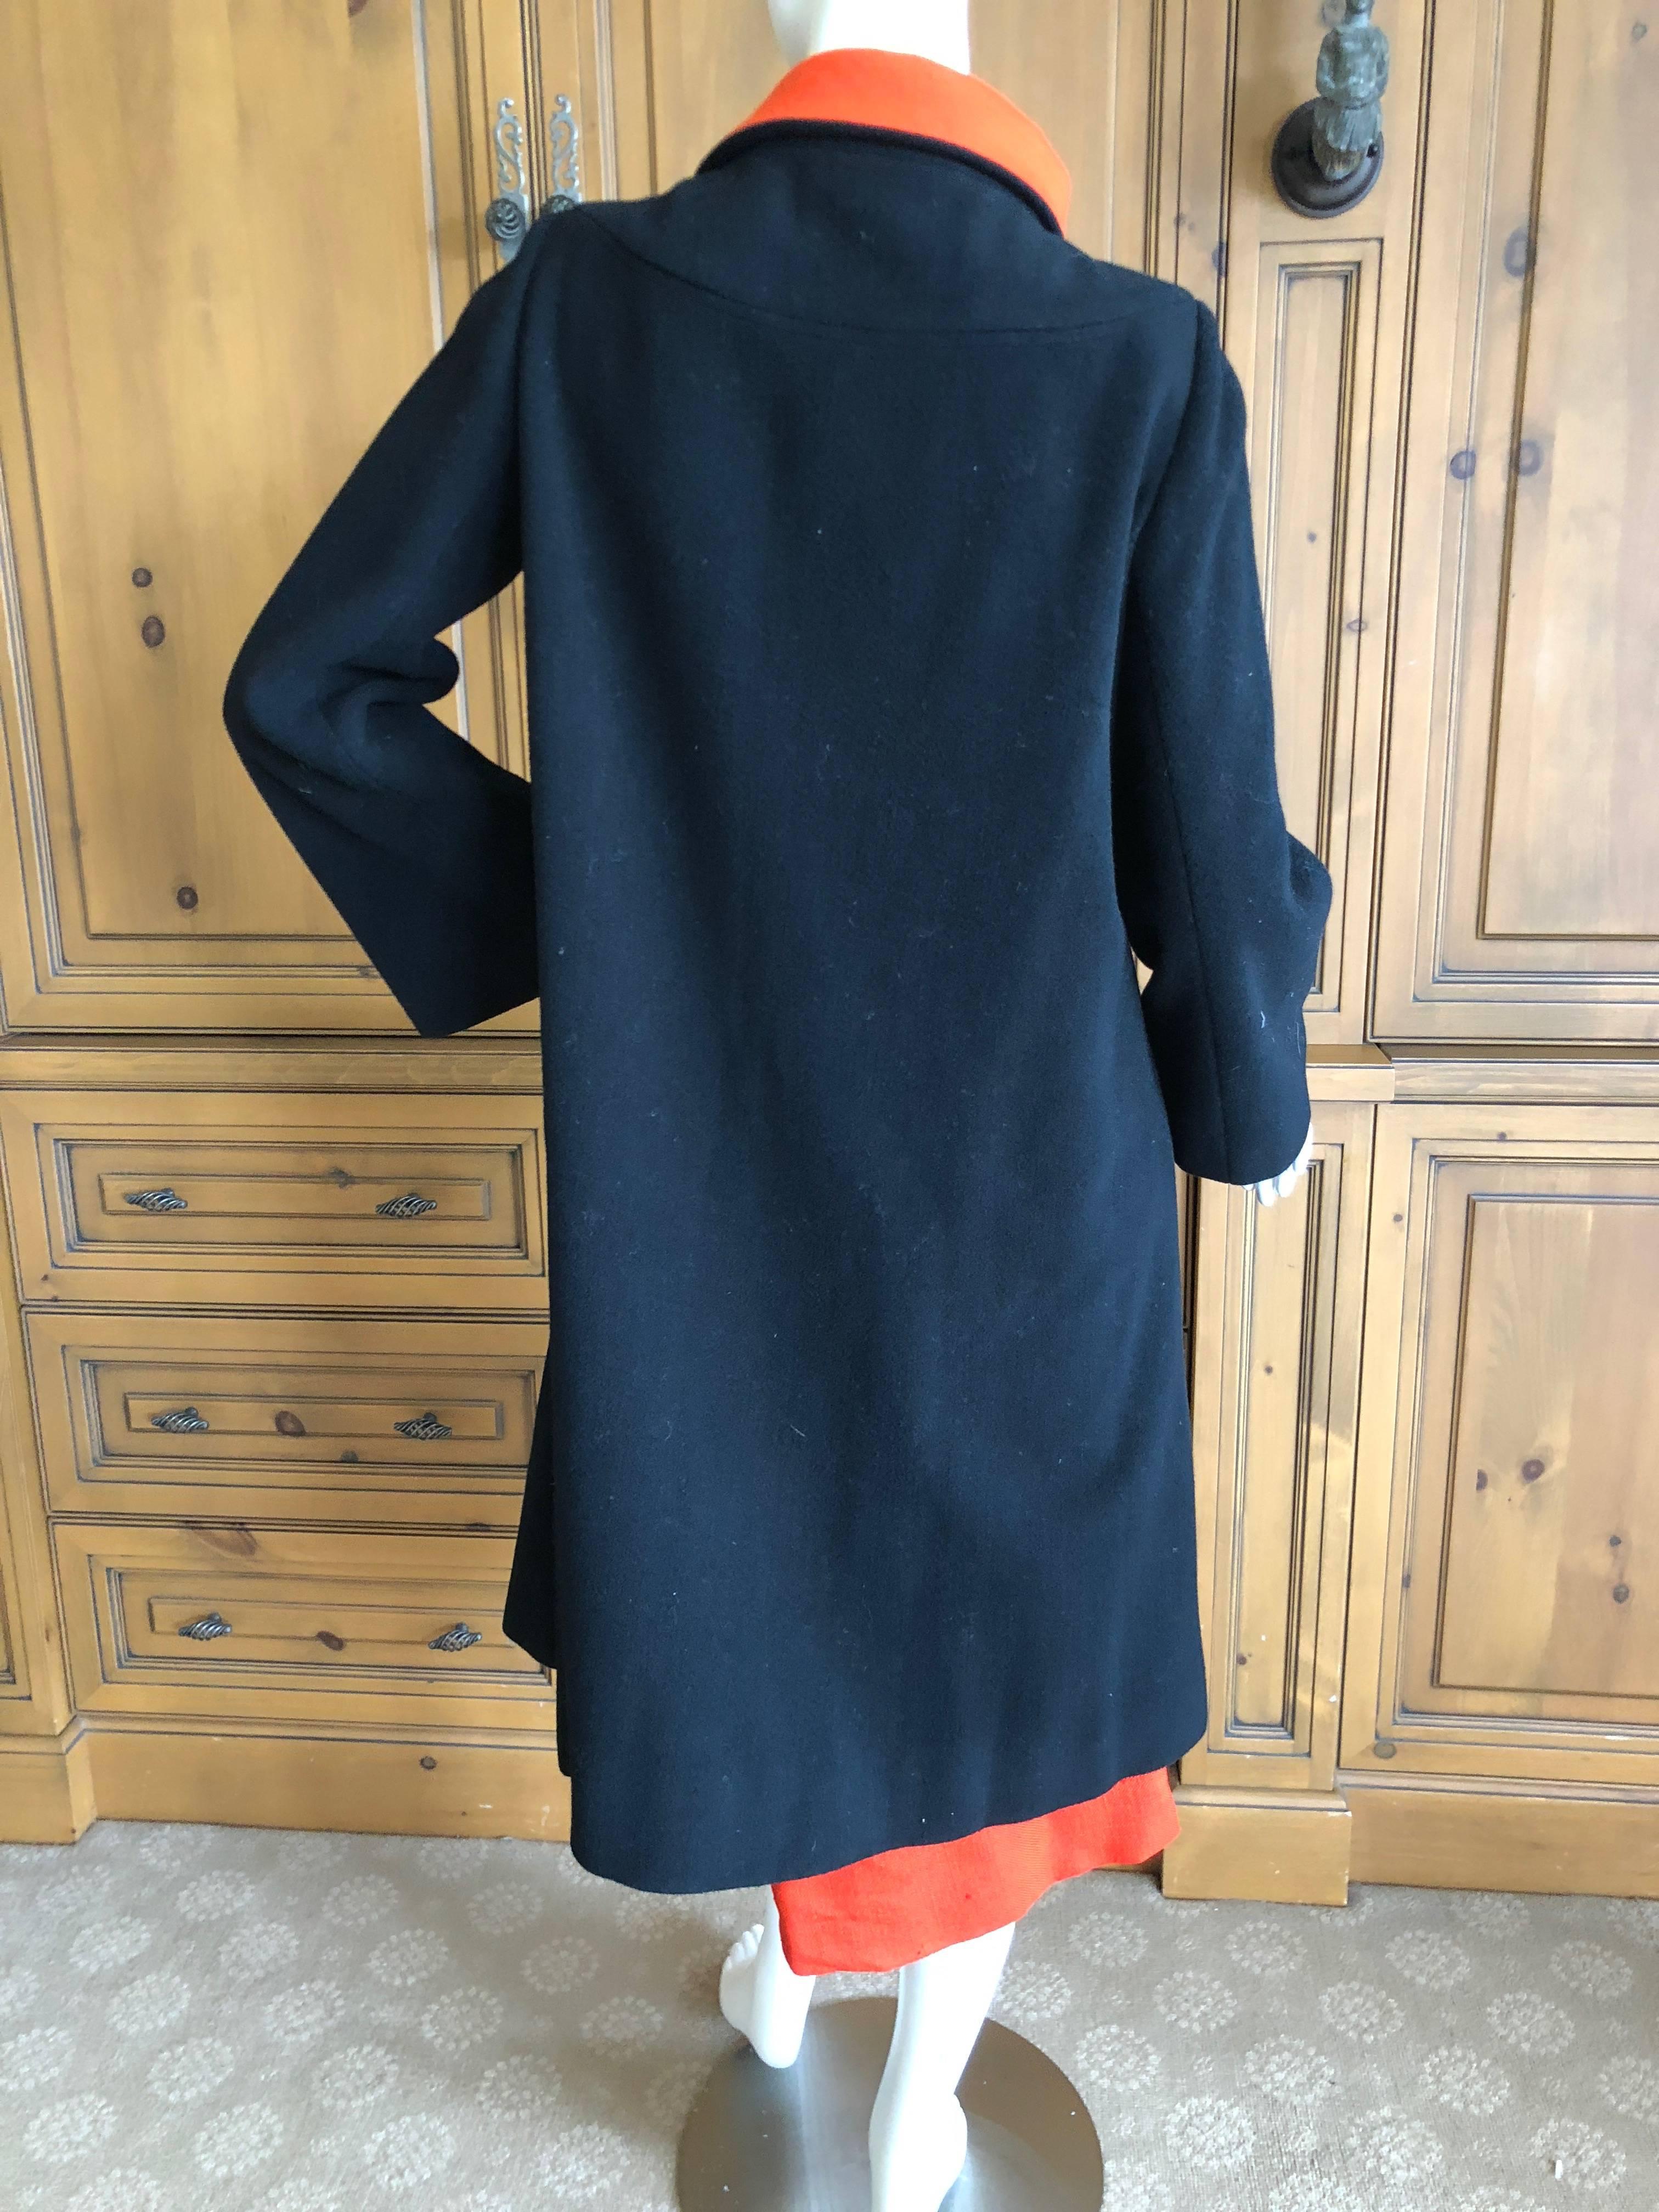 Cardinali 1970 Black Wool Coat with Orange Lining and Matching Skirt For Sale 5